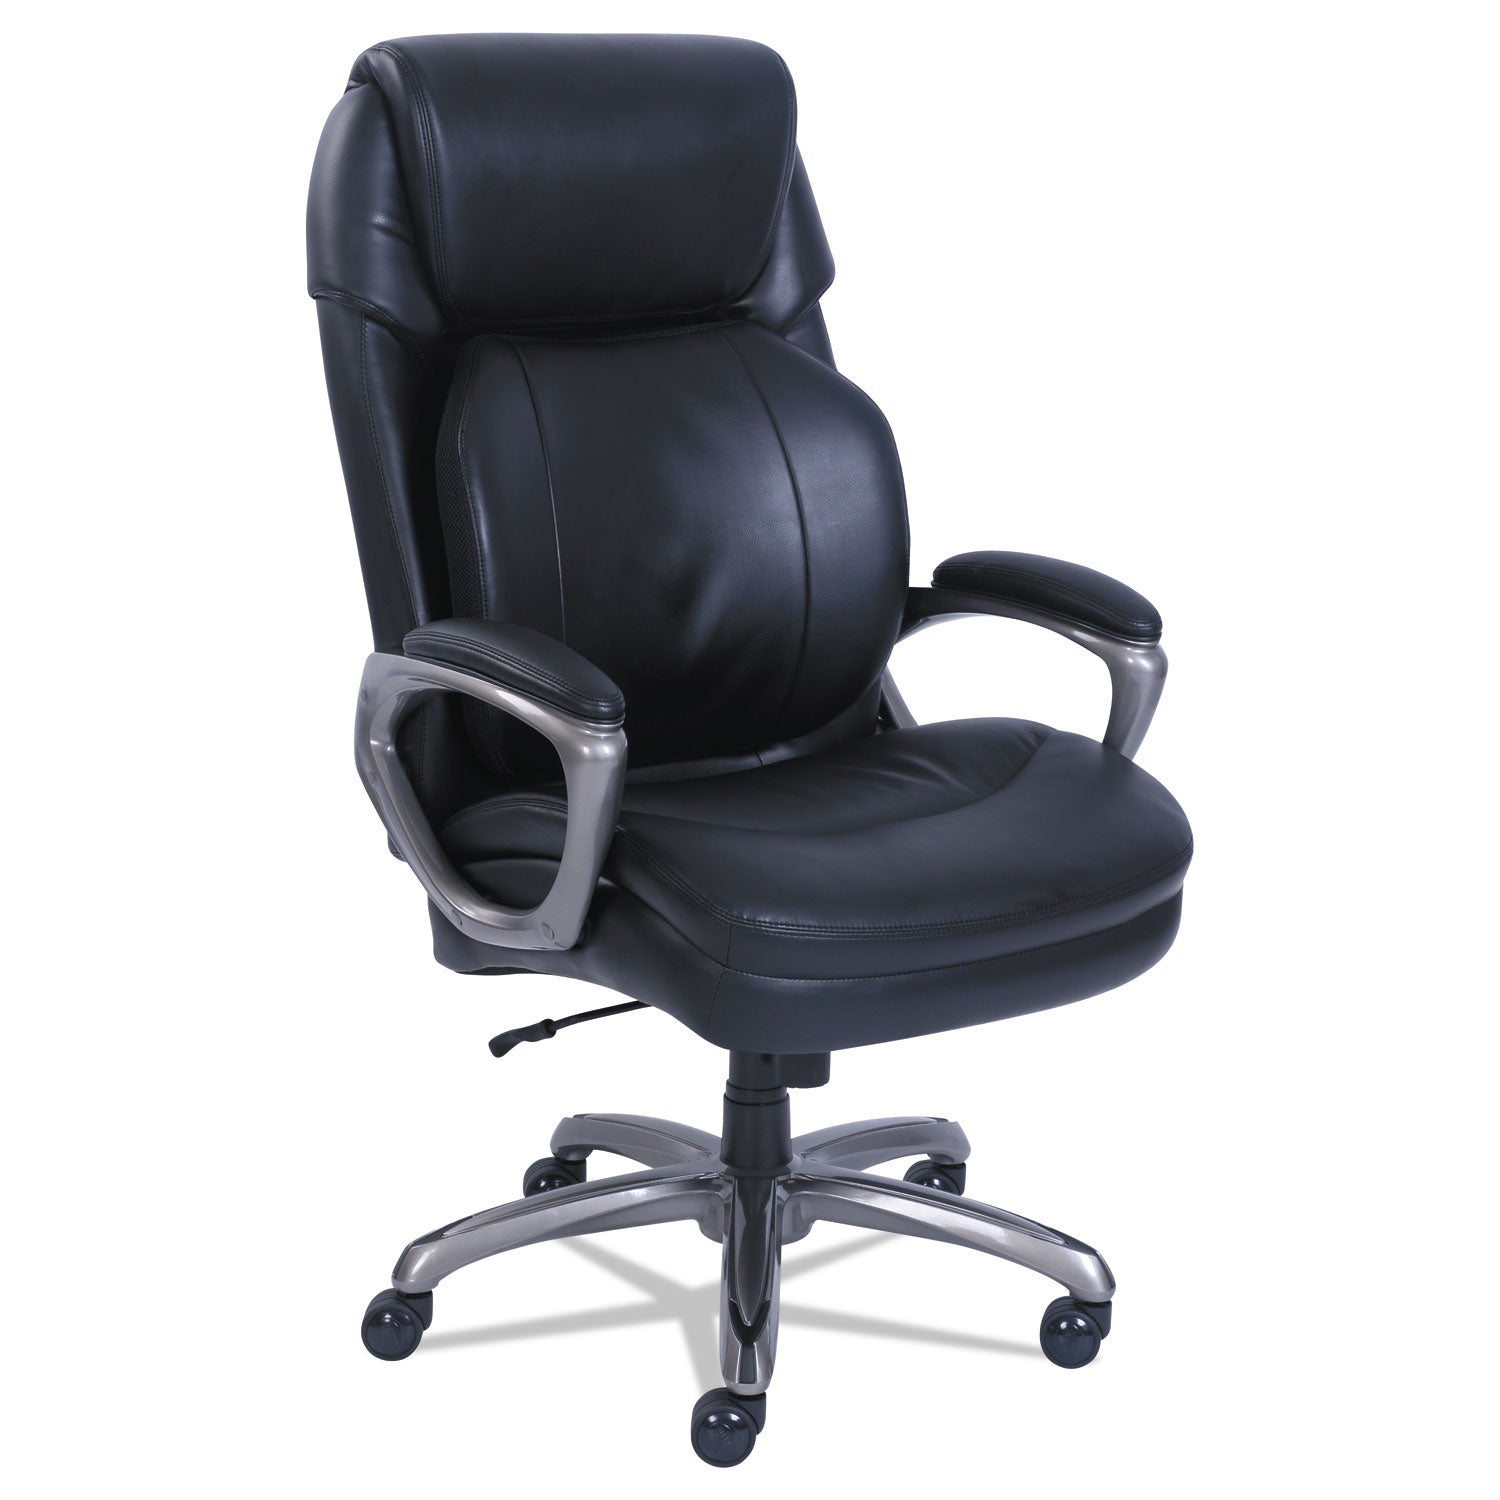 cosset-big-and-tall-executive-chair-supports-up-to-400-lb-19-to-22-seat-height-black-seat-back-slate-base_srj48964 - 1